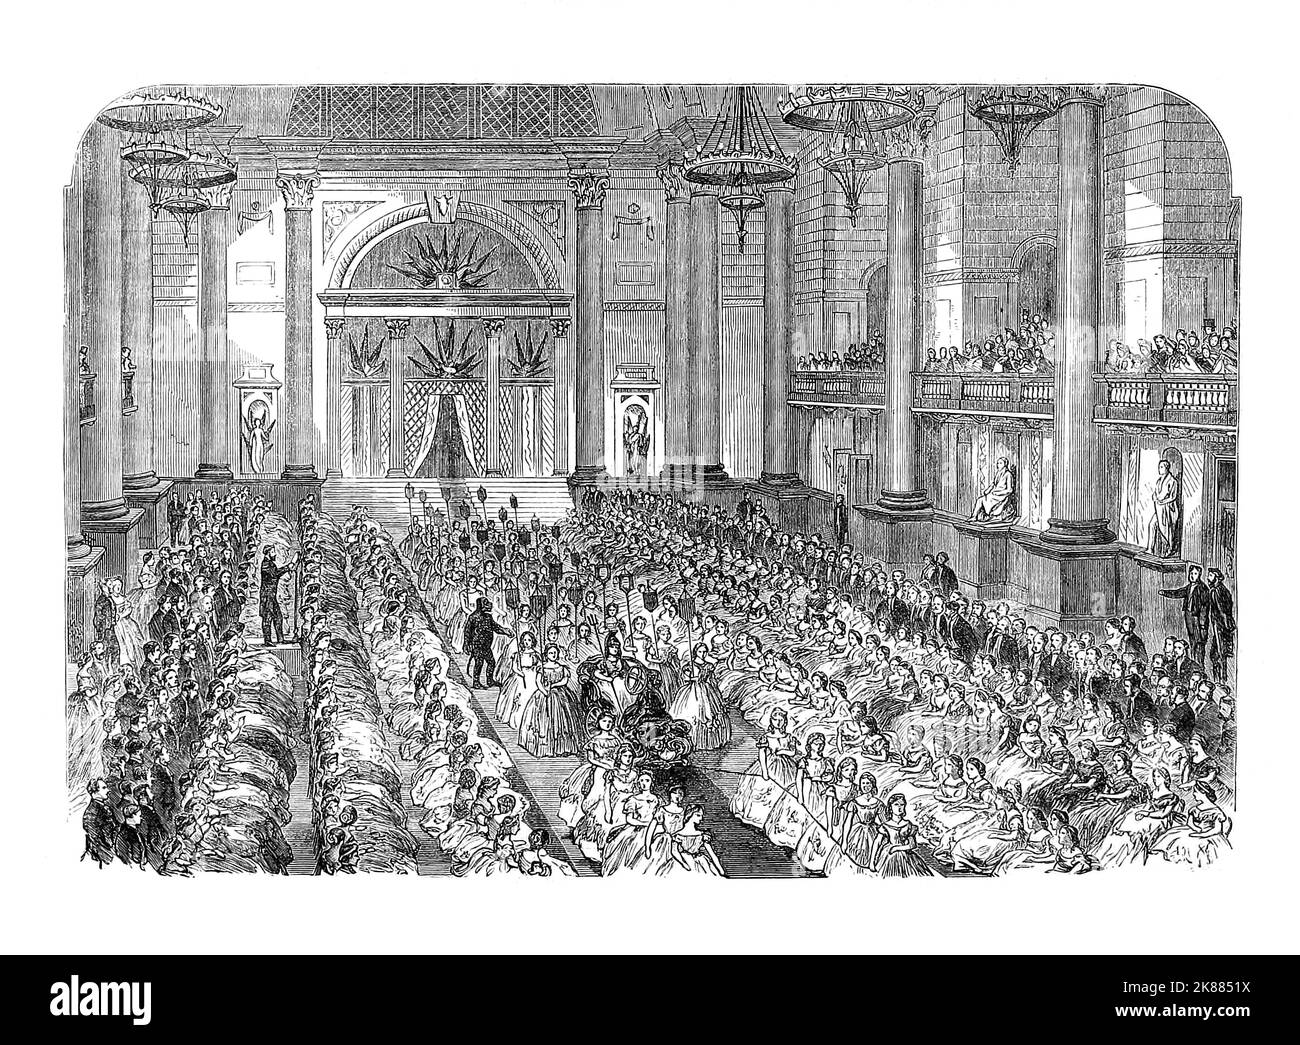 A Christmas party in St George's Hall laid on in 1864, for the staff of Cope Bros & Co was a company based in Liverpool that manufactured tobacco products from 1848 until 1952. By the 1880s the company, employing nearly 2000 staff and producing multiple brands of snuff, cigars, cigarettes and tobacco employed mainly women and girls and was regarded by local press to be a model employer of the age with better working conditions than other employers. Stock Photo